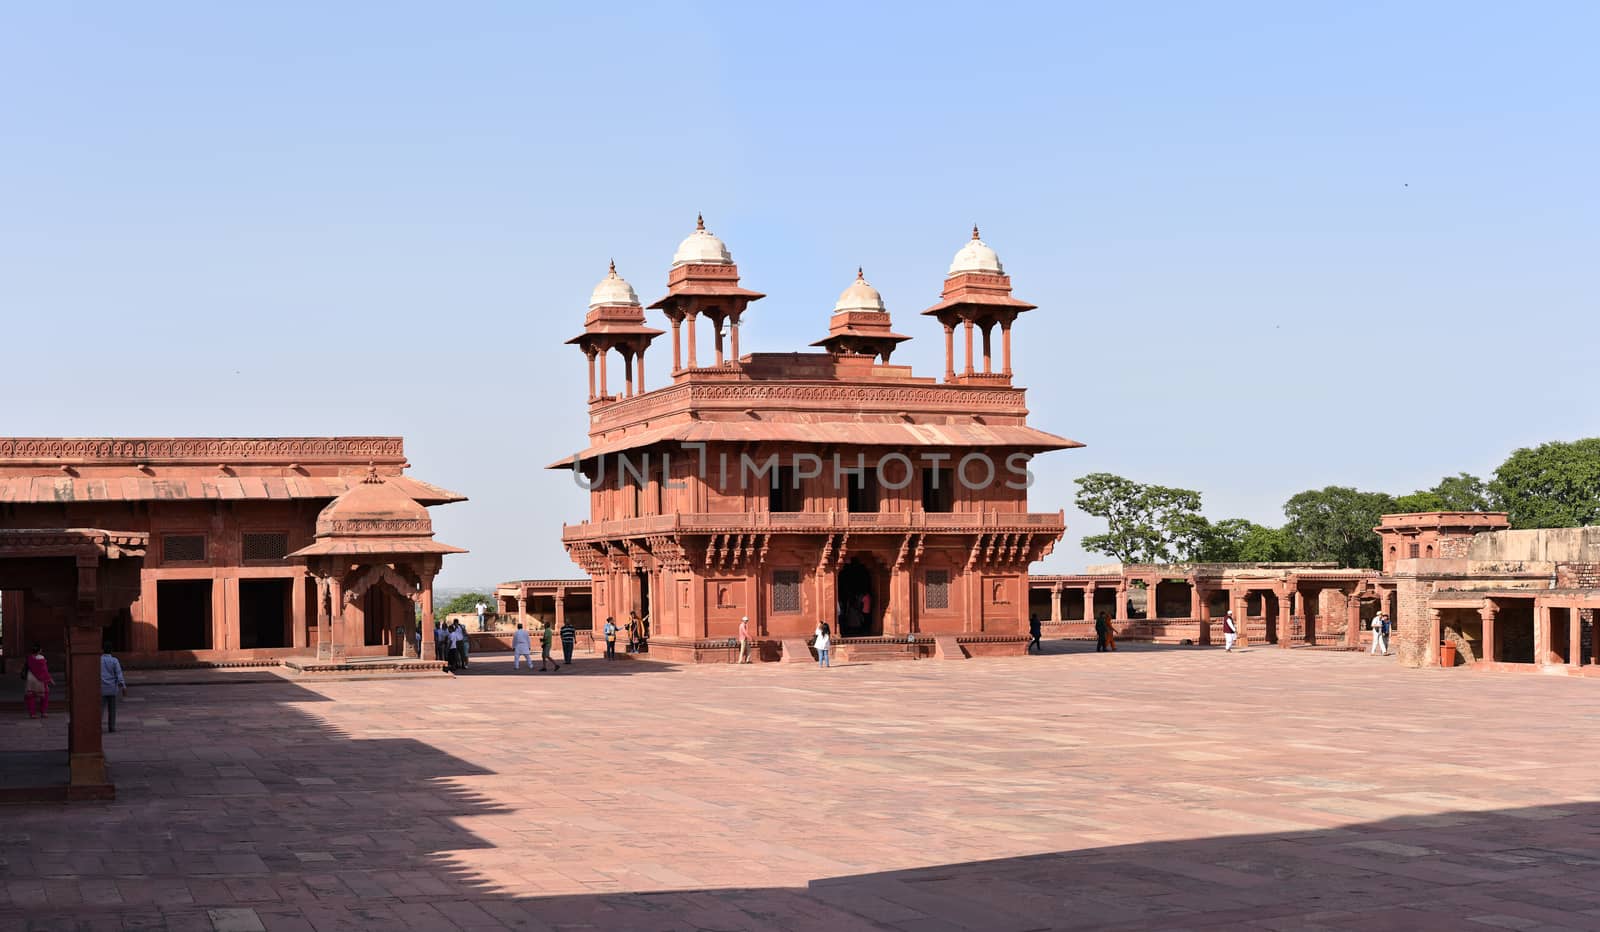 Fatehpur Sikri, India - October 12, 2016: The Diwan-i-Khas Hall of Private Audience in Fatehpur Sikri, Agra, India. A UNESCO World Heritage Site.